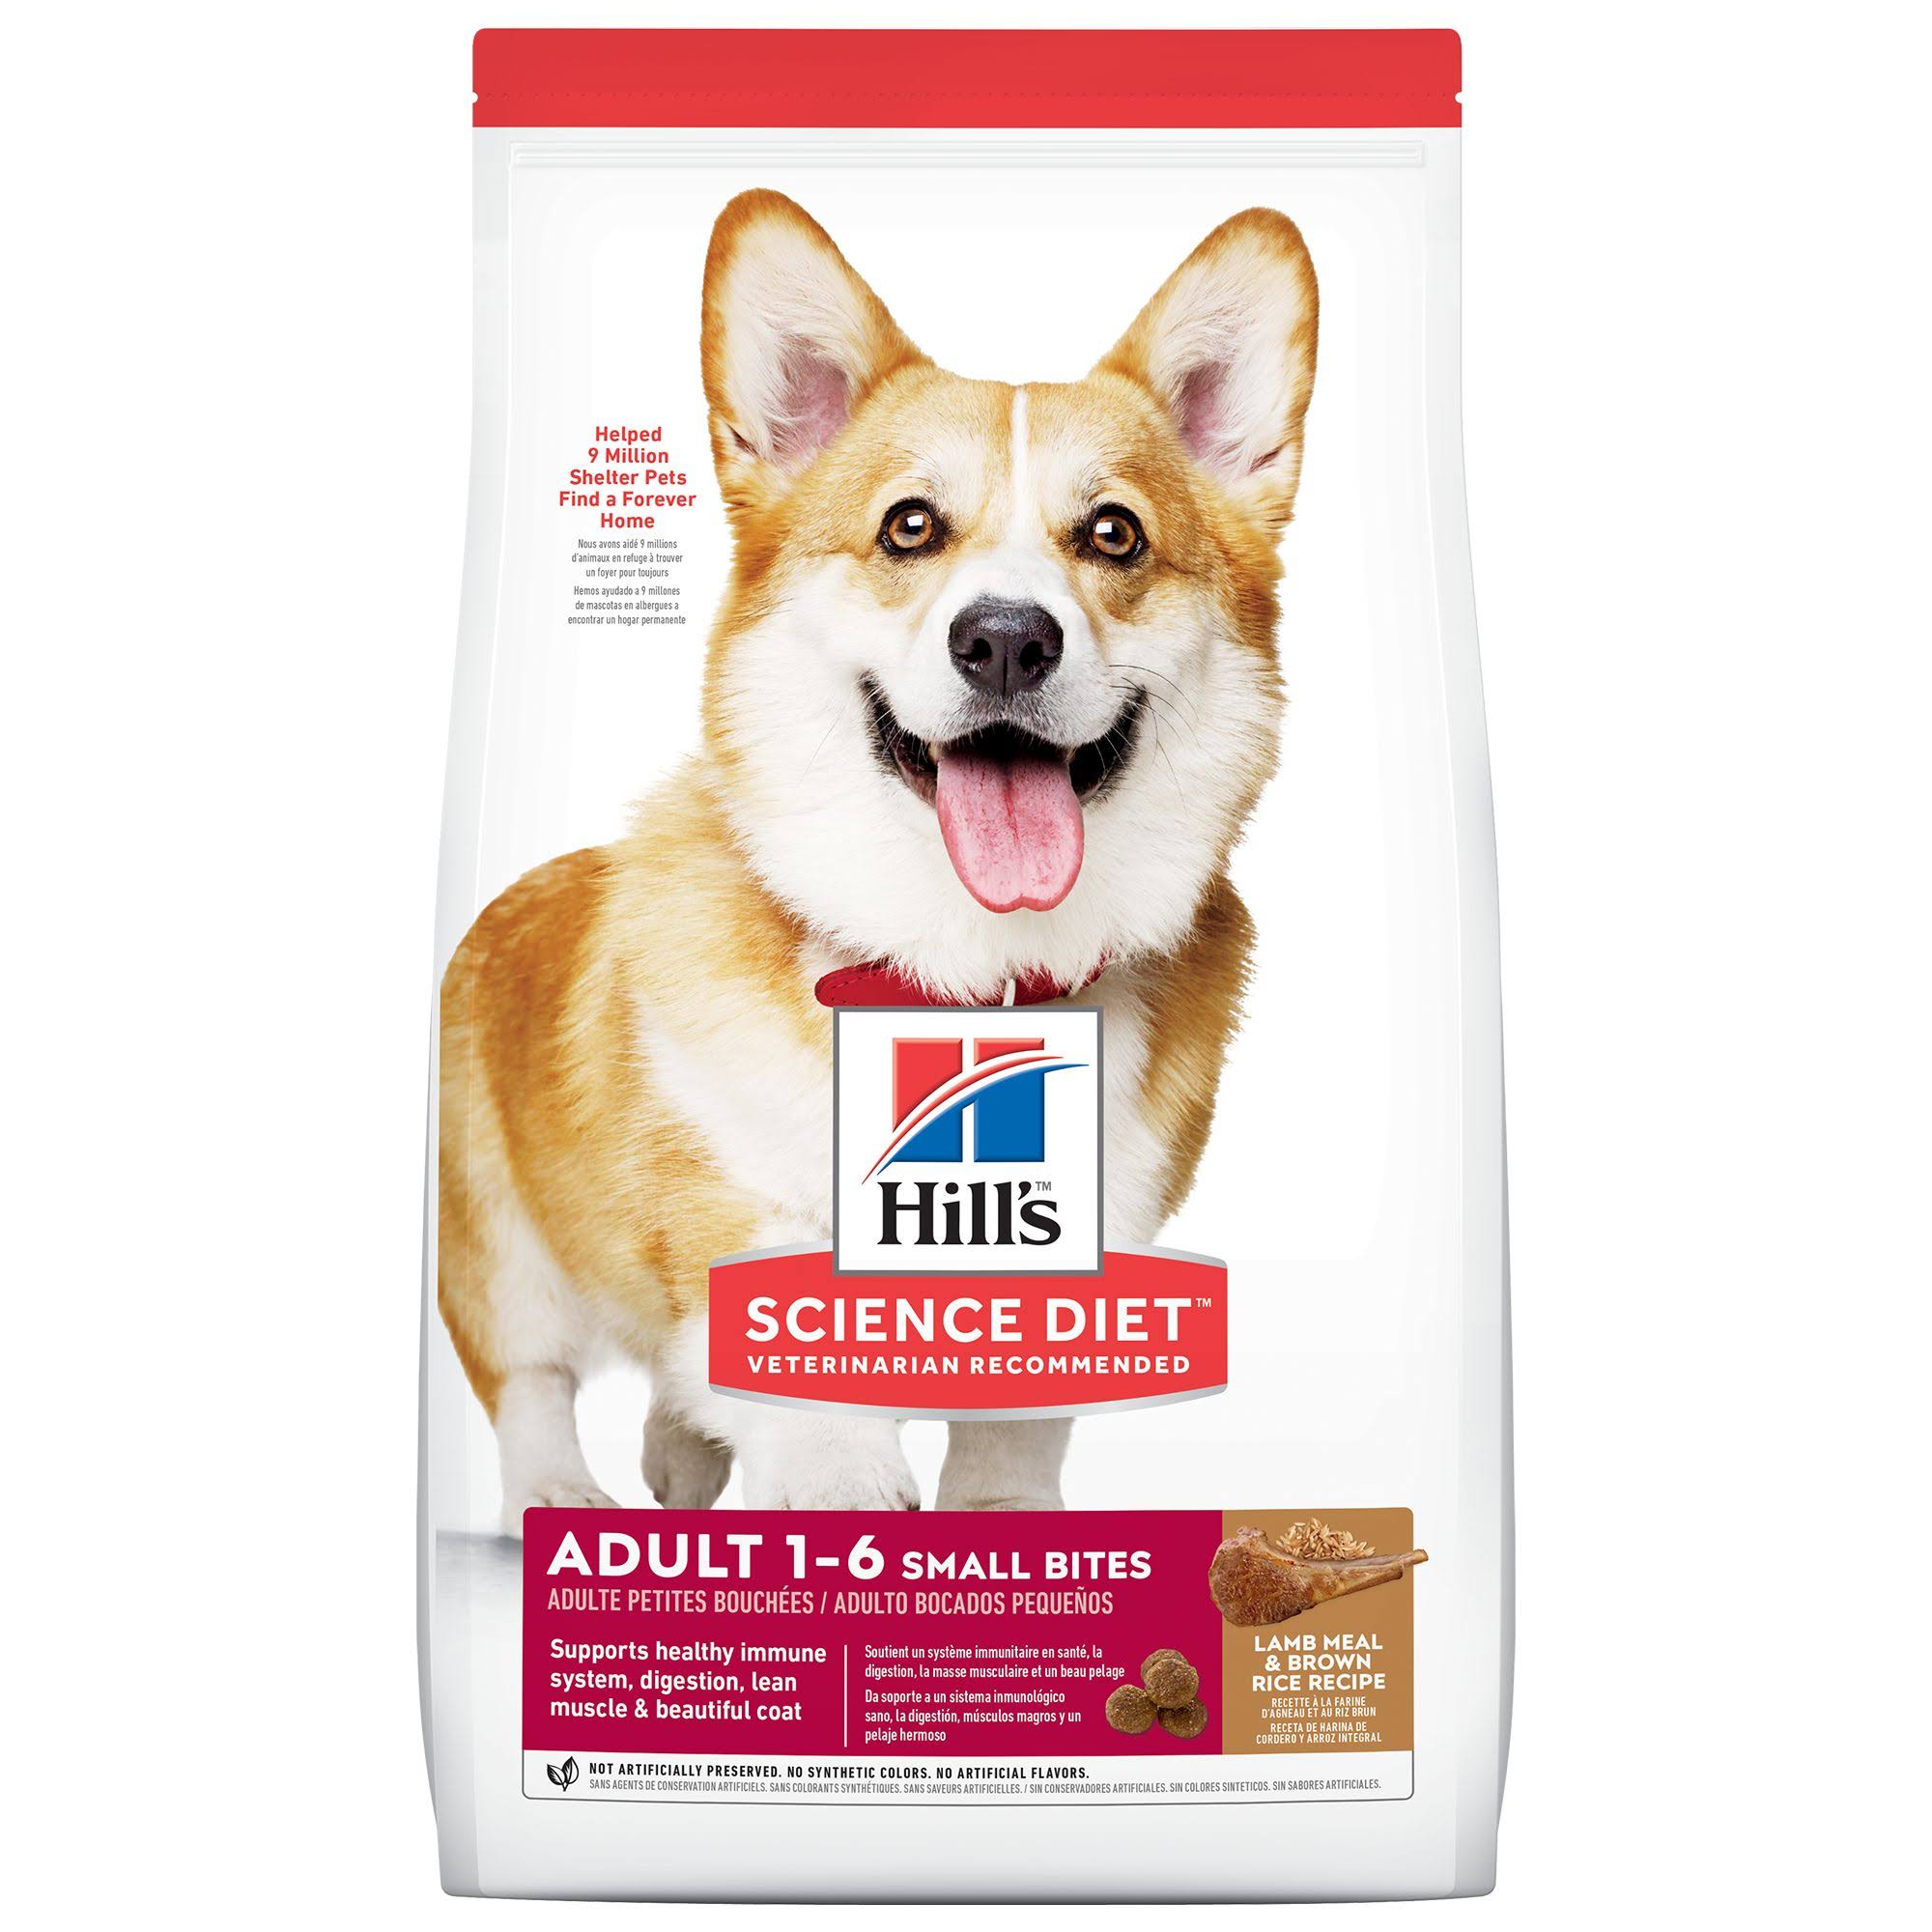 Hill's Science Diet Advanced Fitness Small Bites Dog Food - Lamb Meal and Rice Recipe, Adult 1-6, 15.5lbs